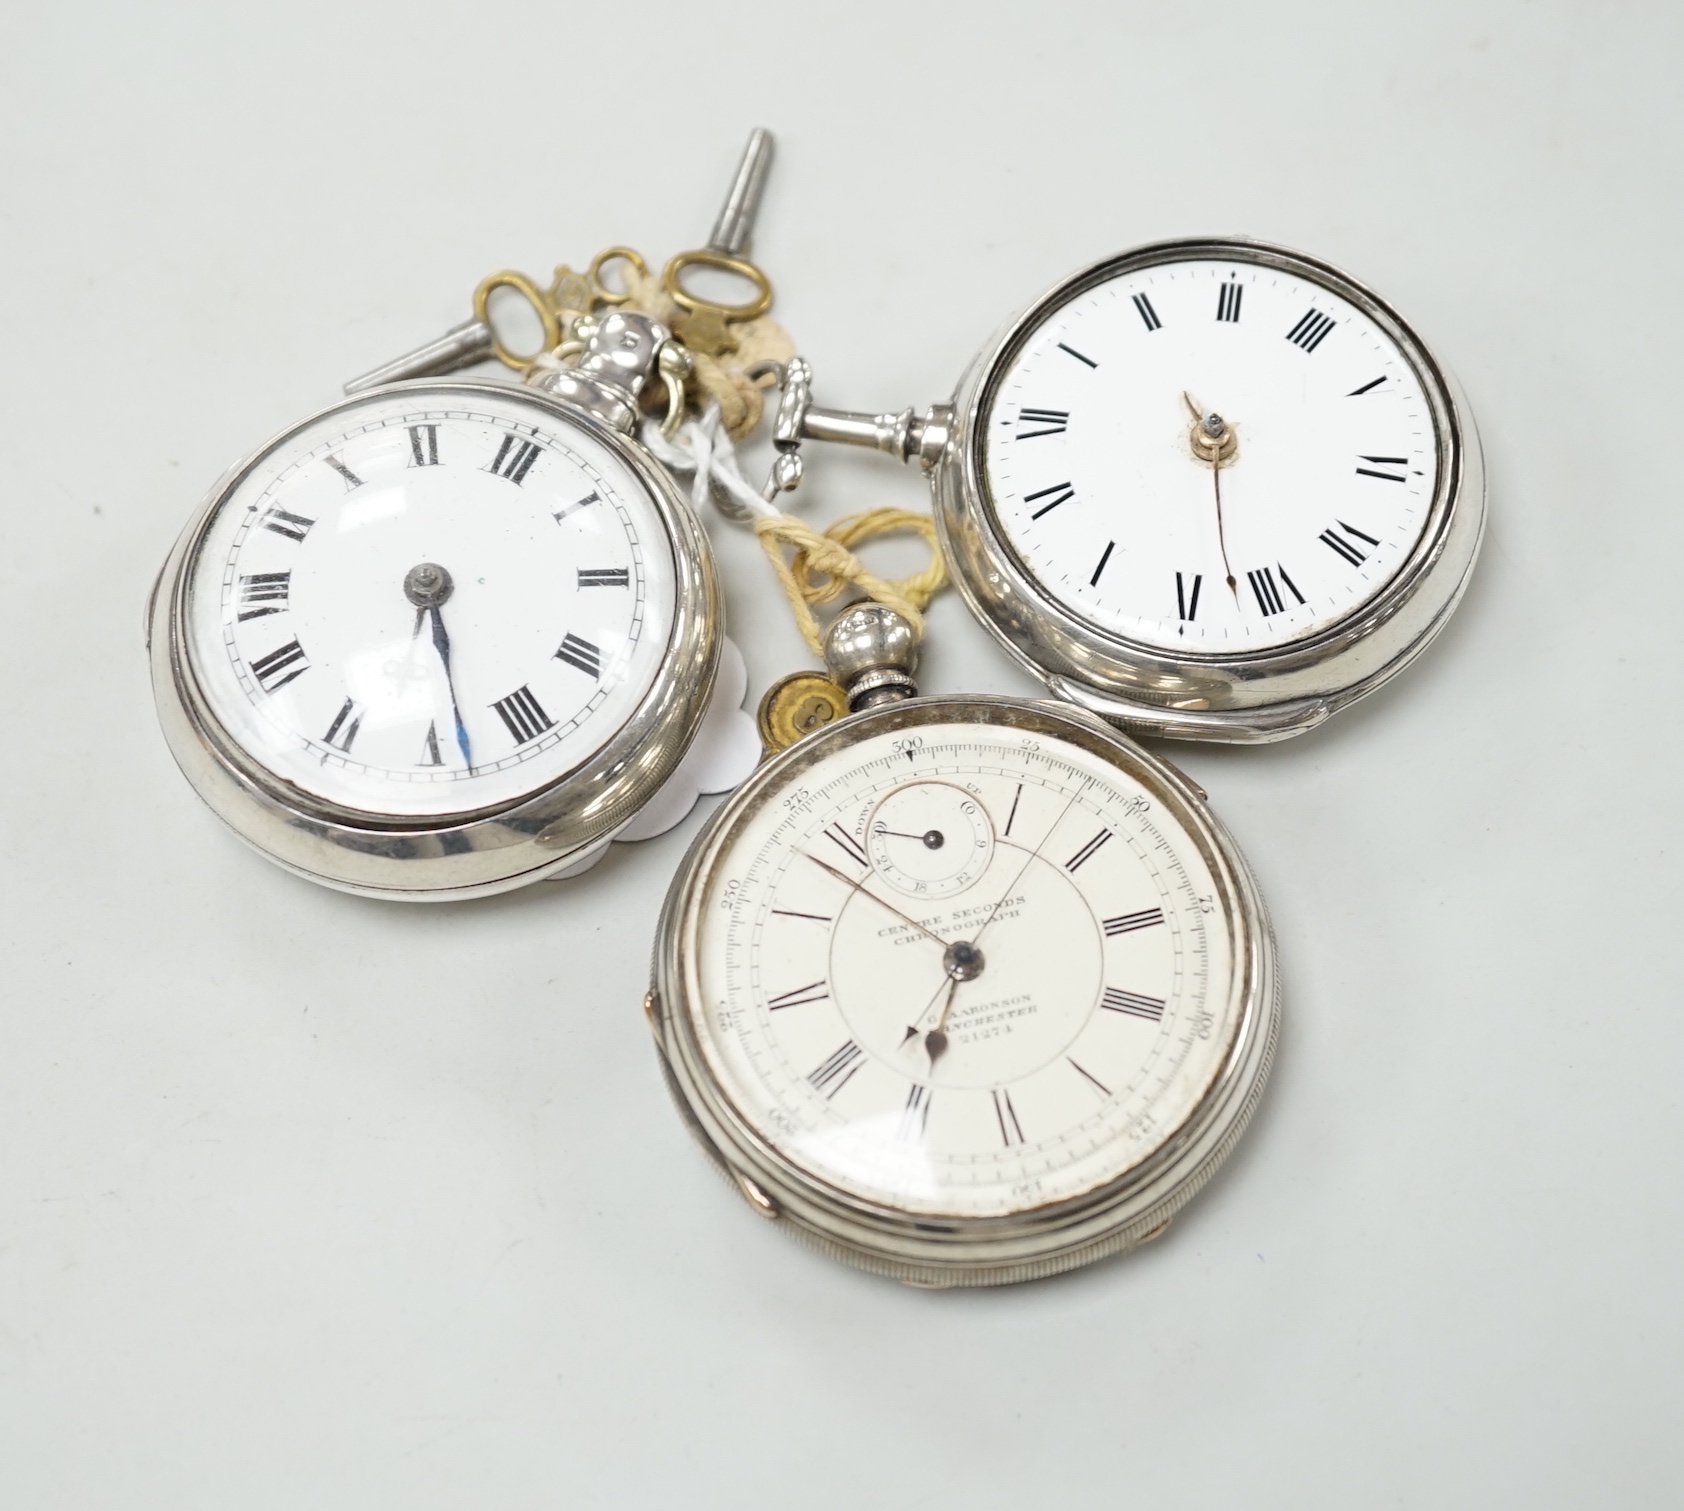 Three assorted silver pocket watches, including two pair cased and an open faced chronograph, by Aaronson, Manchester.